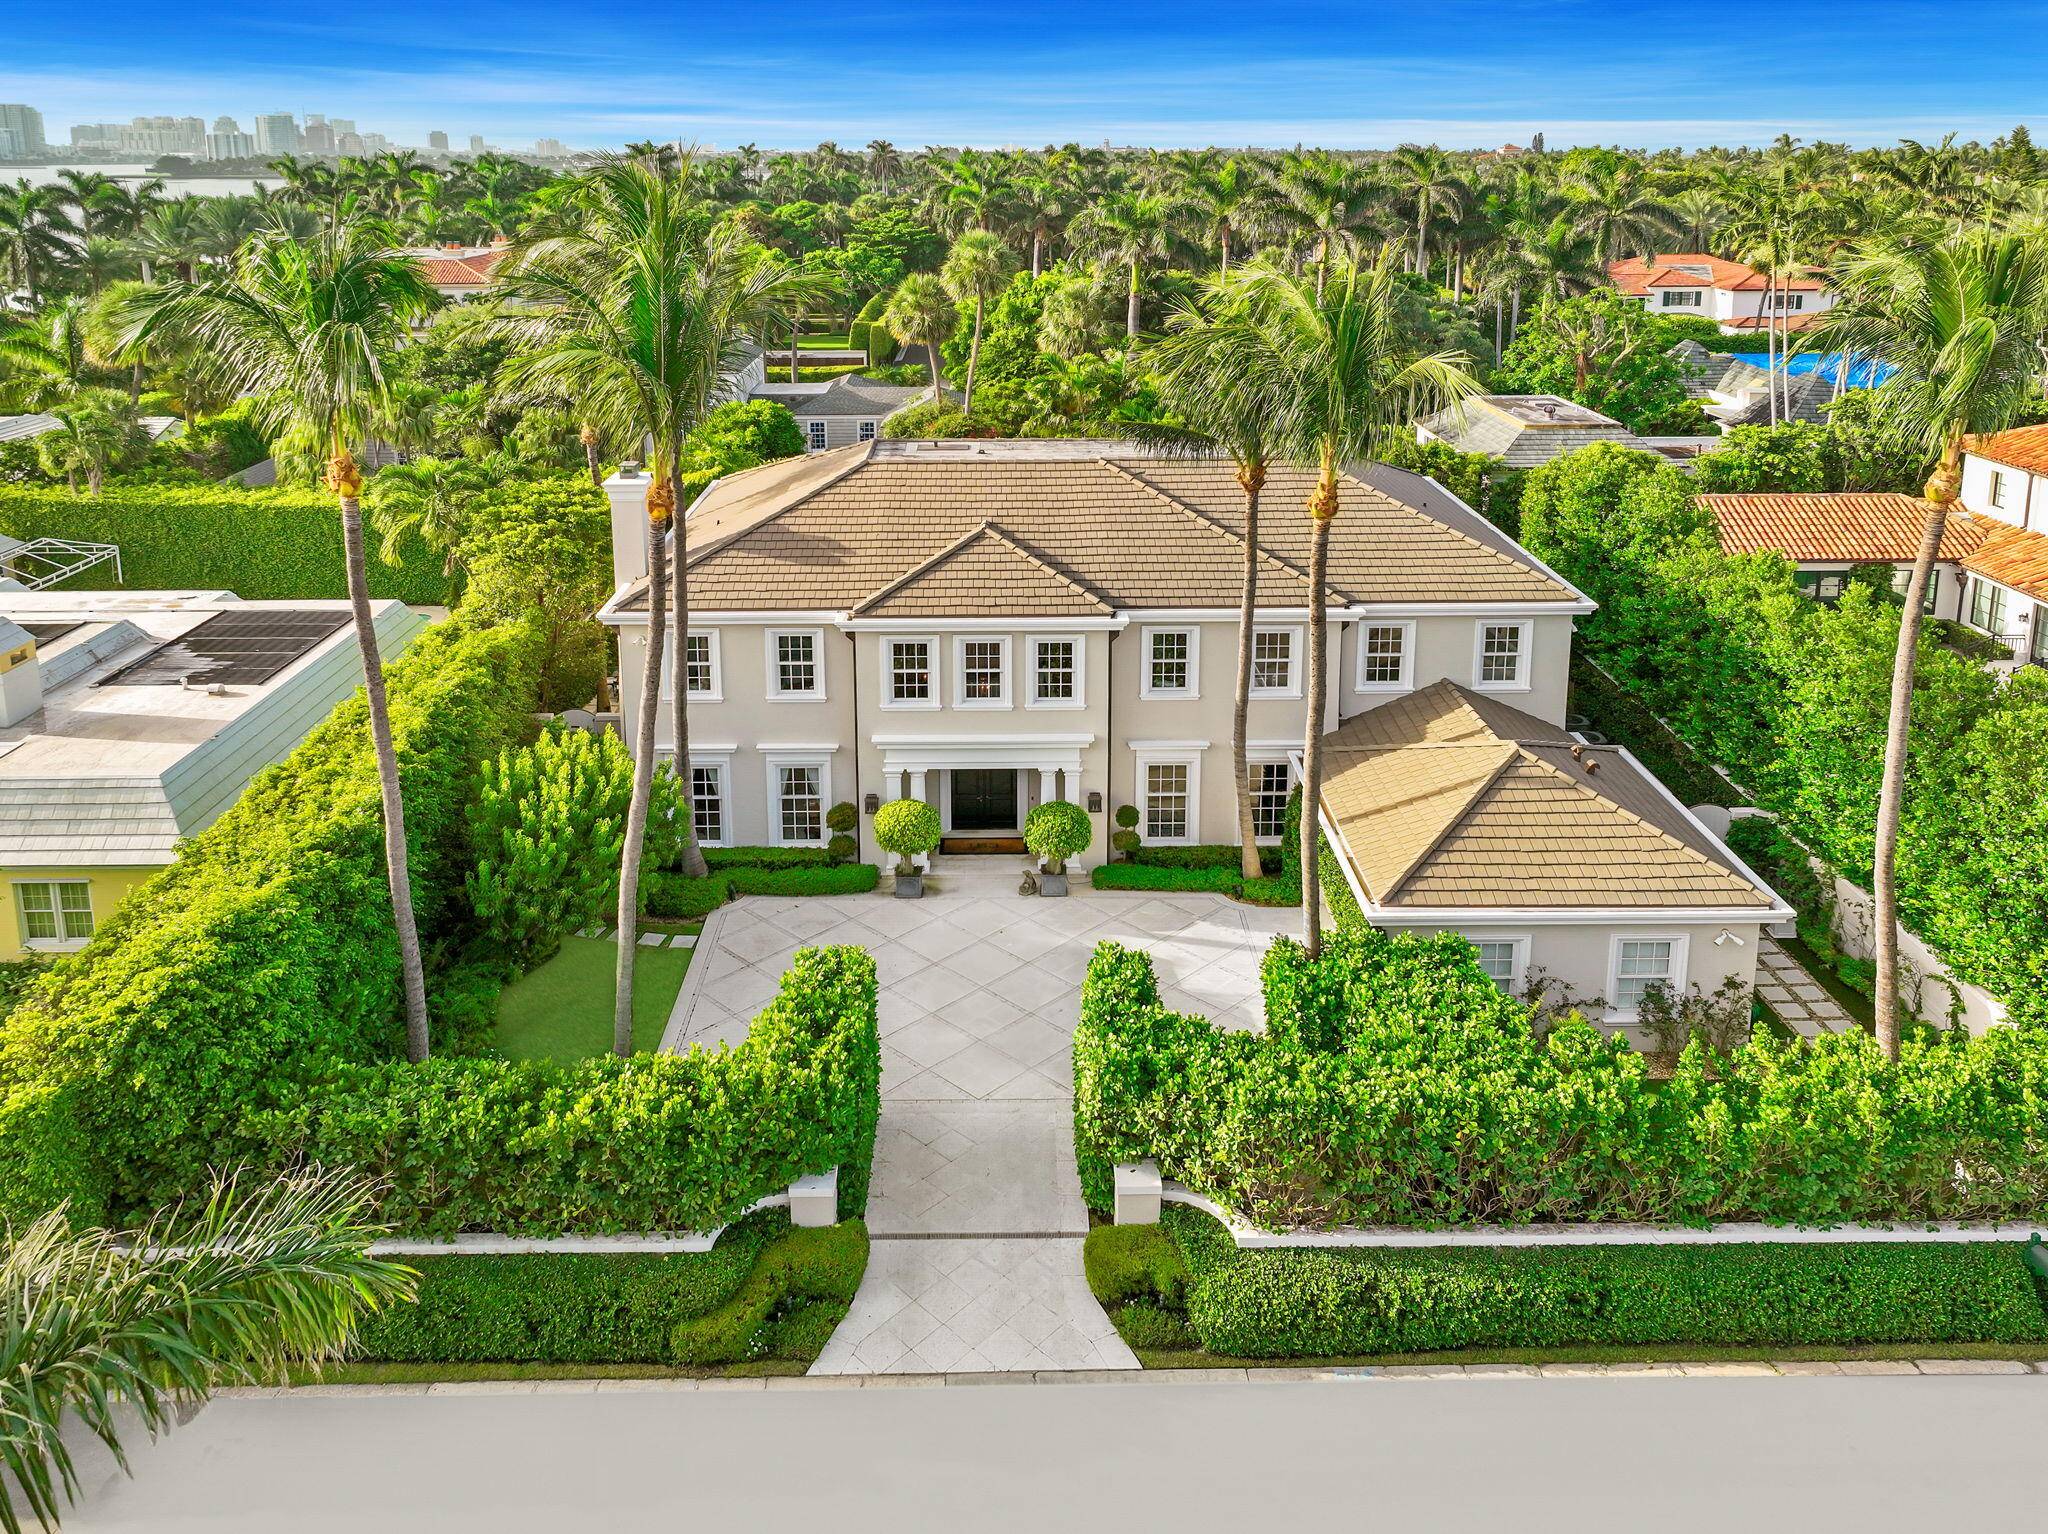 This turnkey 6, 800 sqft Georgian style home in Palm Beach's estate section was designed to feel older but w all modern amenities.